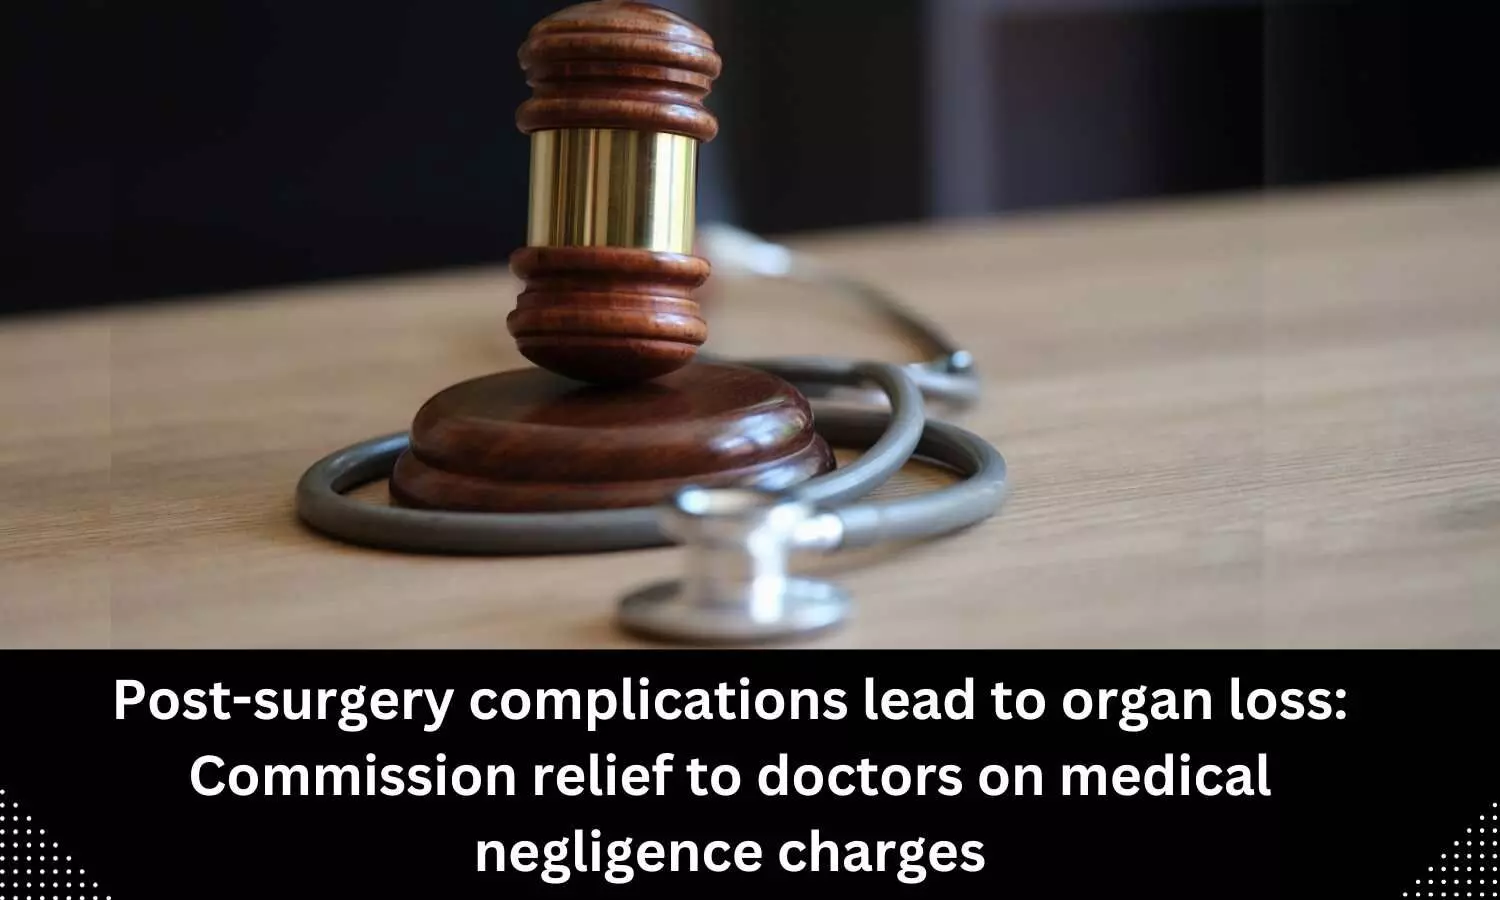 Post-surgery complications lead to organ loss: Commission relief to doctors on medical negligence charges